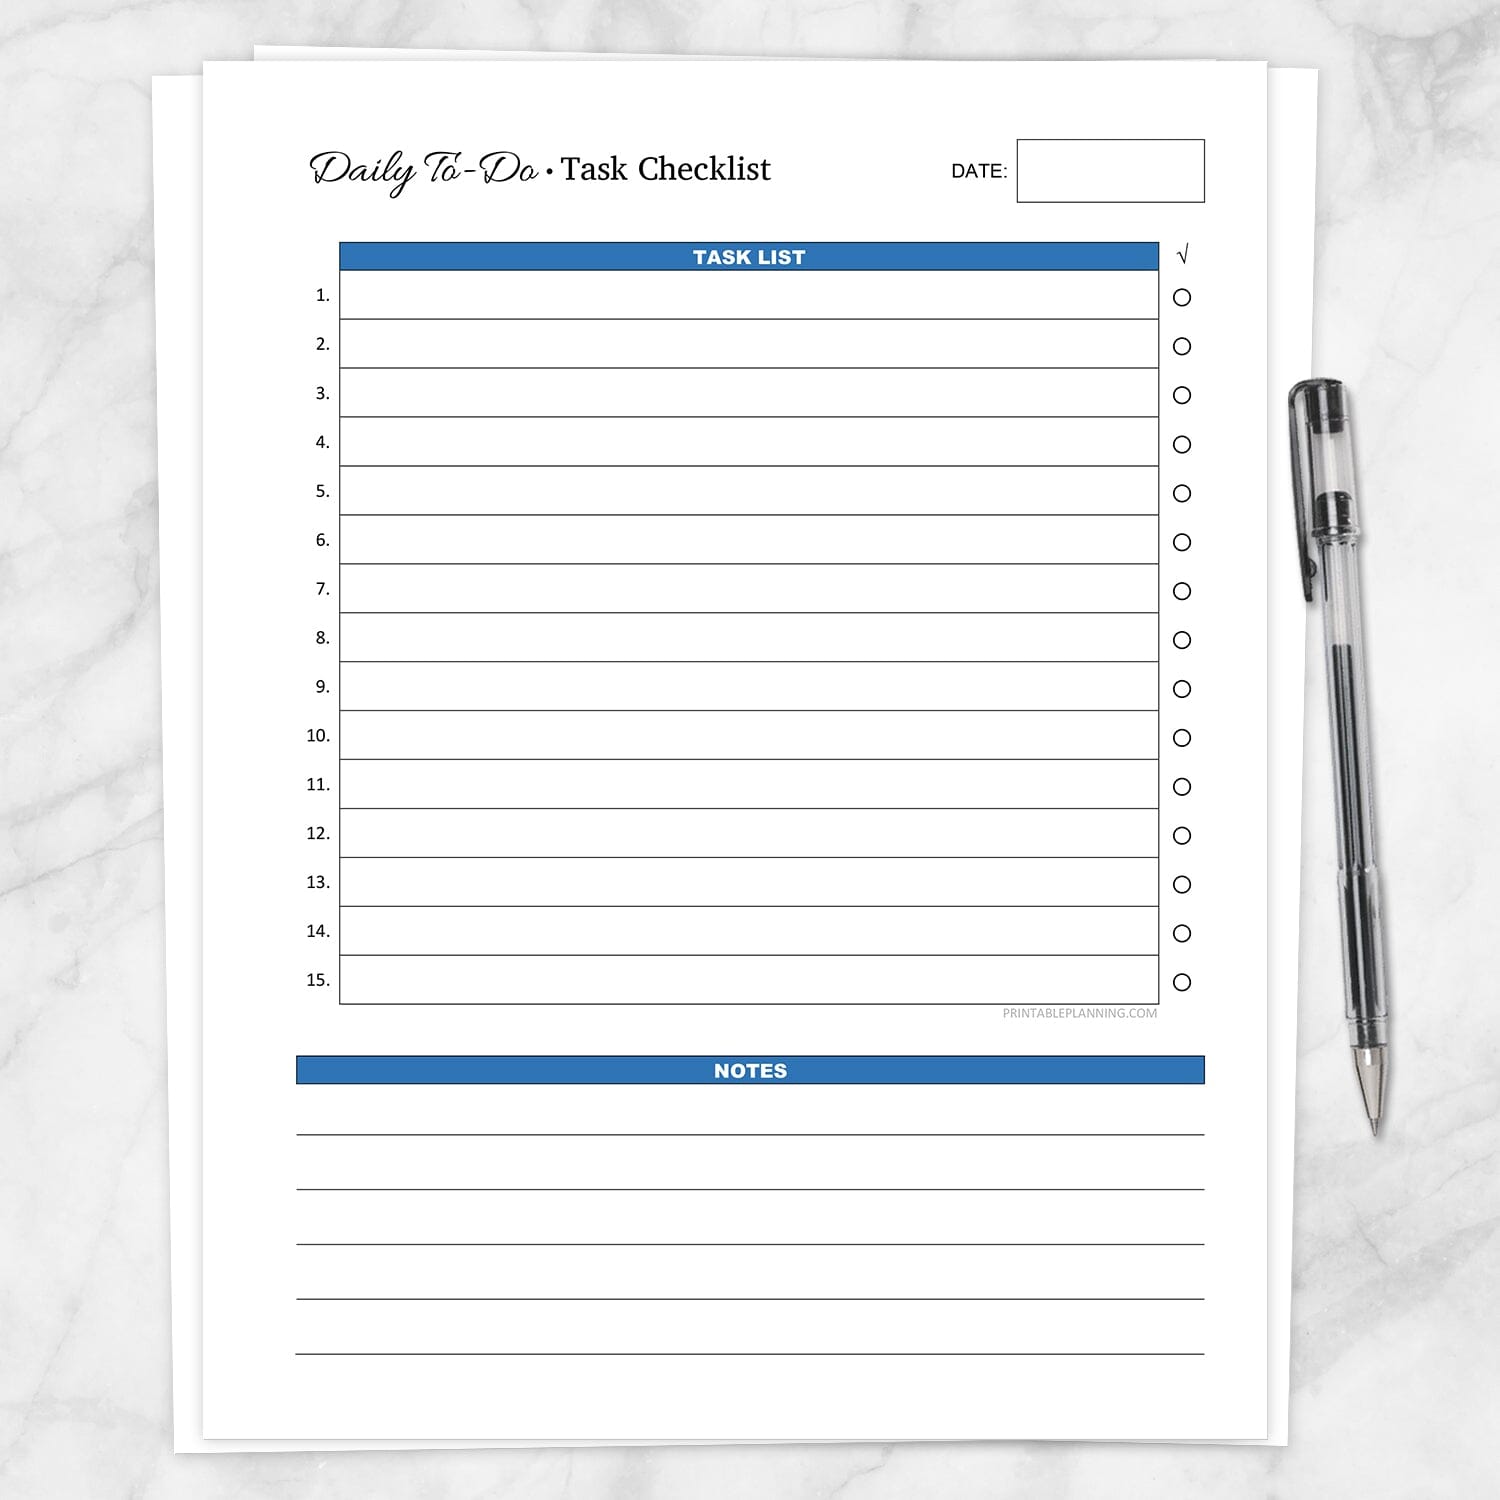 Printable Daily To-Do List - Task Checklist in Blue at Printable Planning.